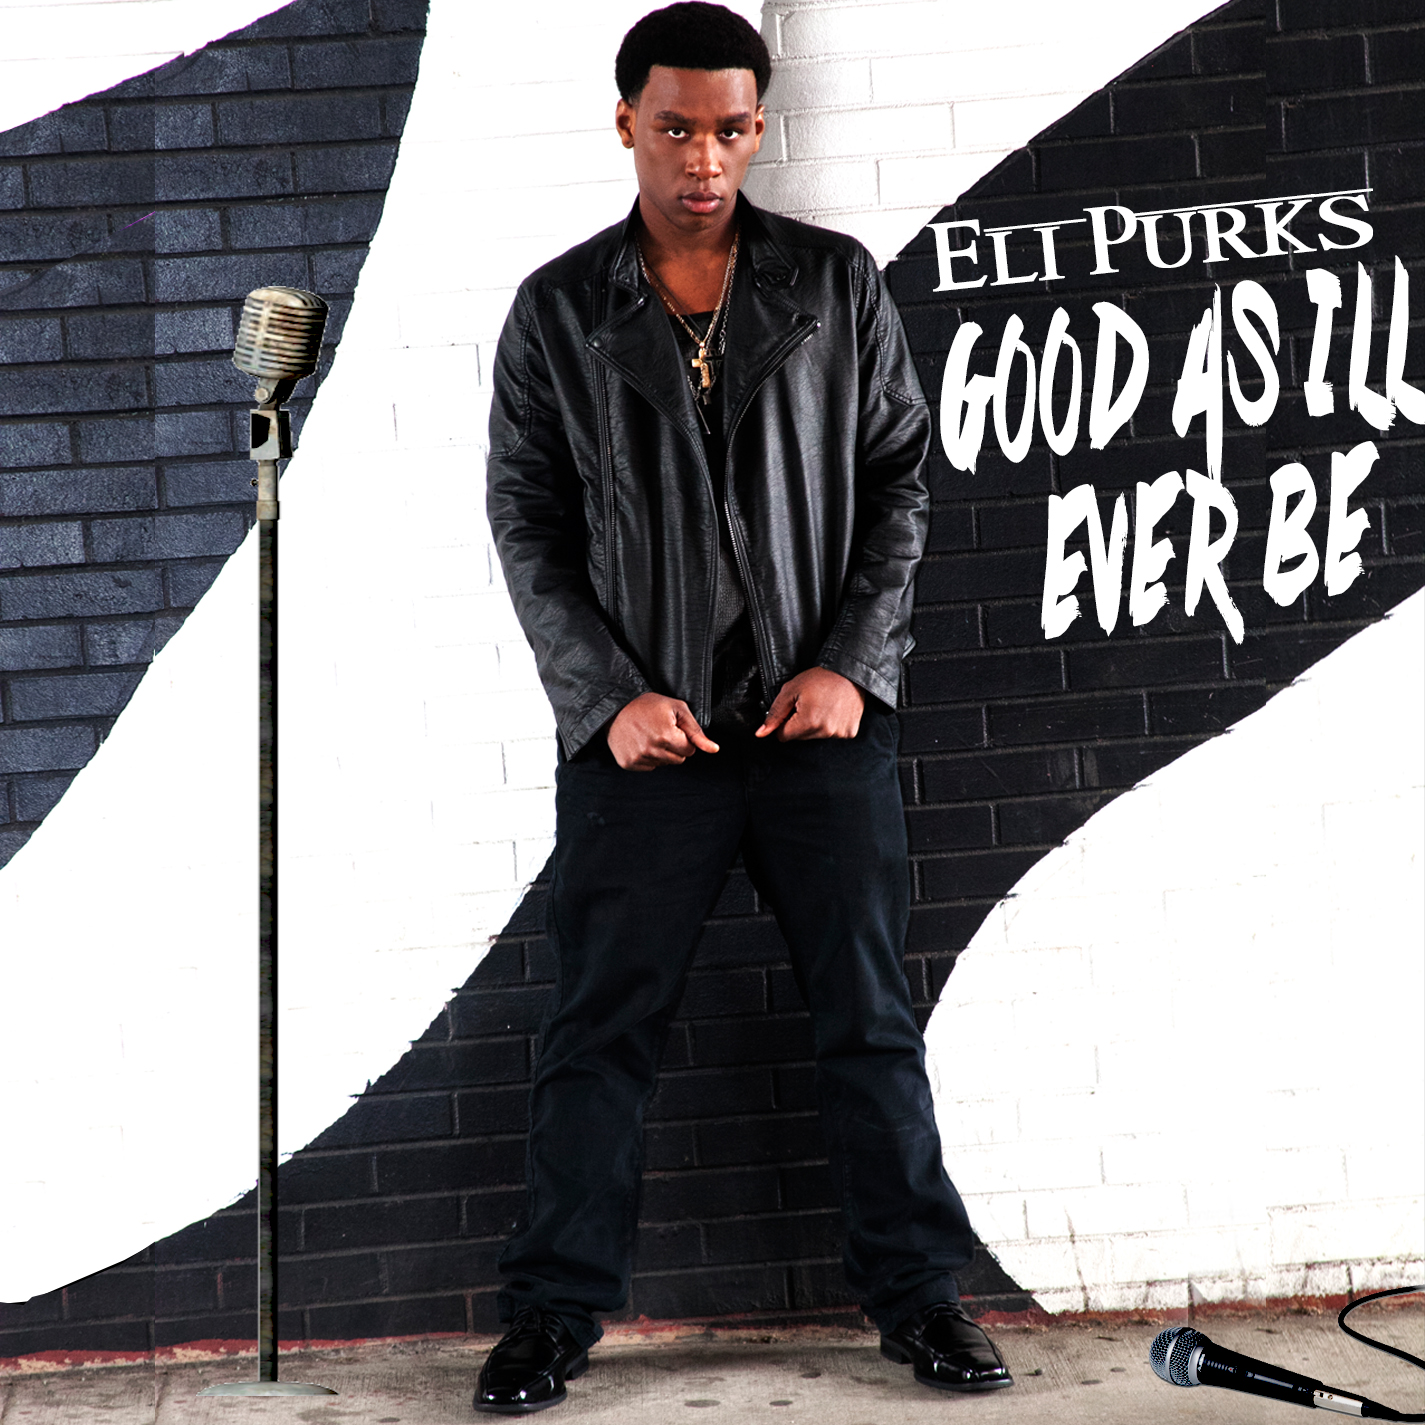 Eli Purks "Good as I'll Ever Be" Available on iTunes and Amazon Music